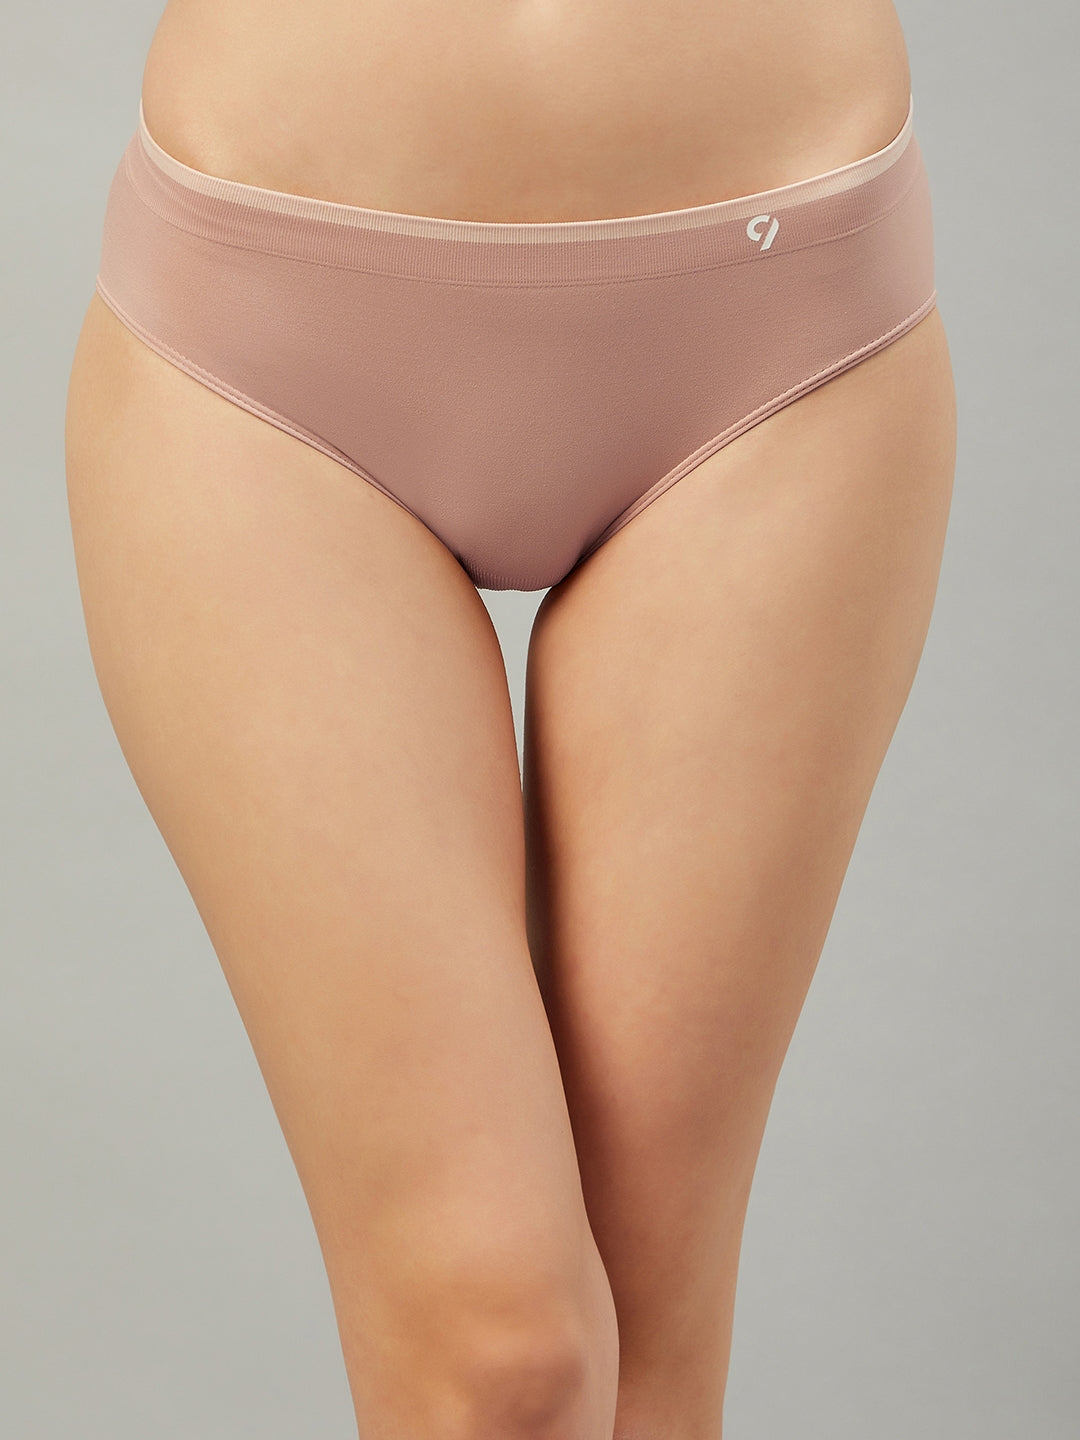 C9 Plain Womens Edge Motif Brief Panty, Size: XXL at best price in Lucknow